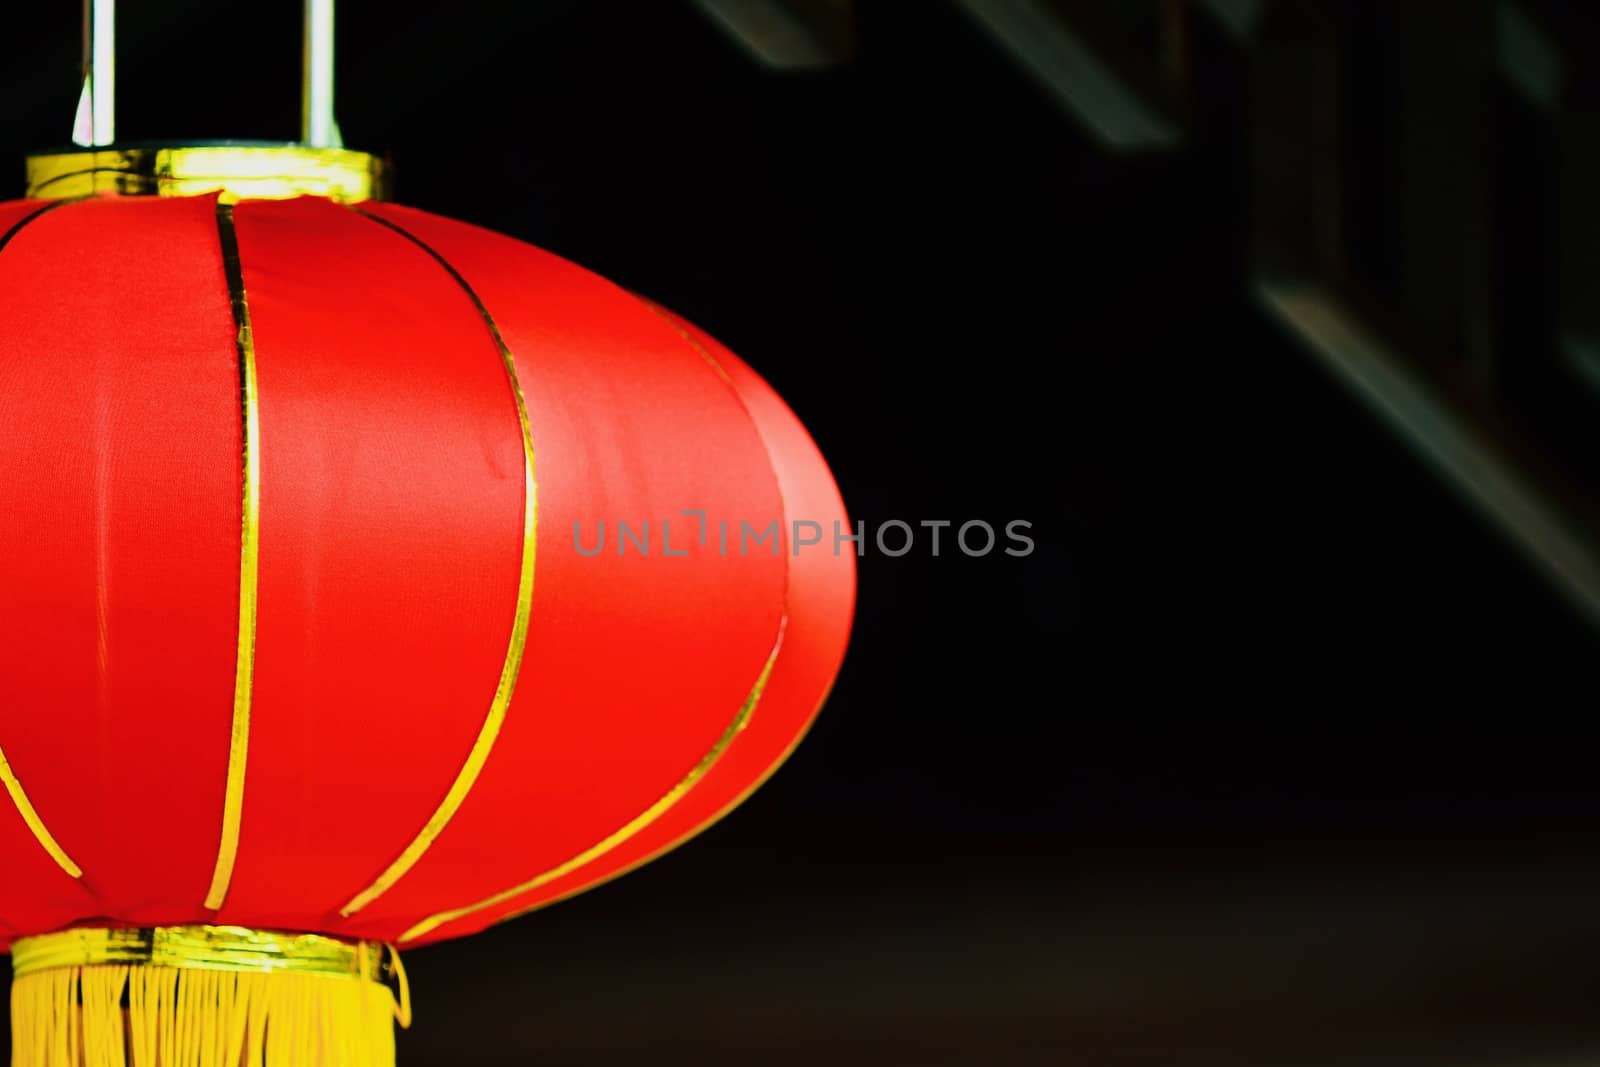 Chinese New Year decorations involving the red colour and lucky images to Drive Off Bad Luck. by Marshalkina